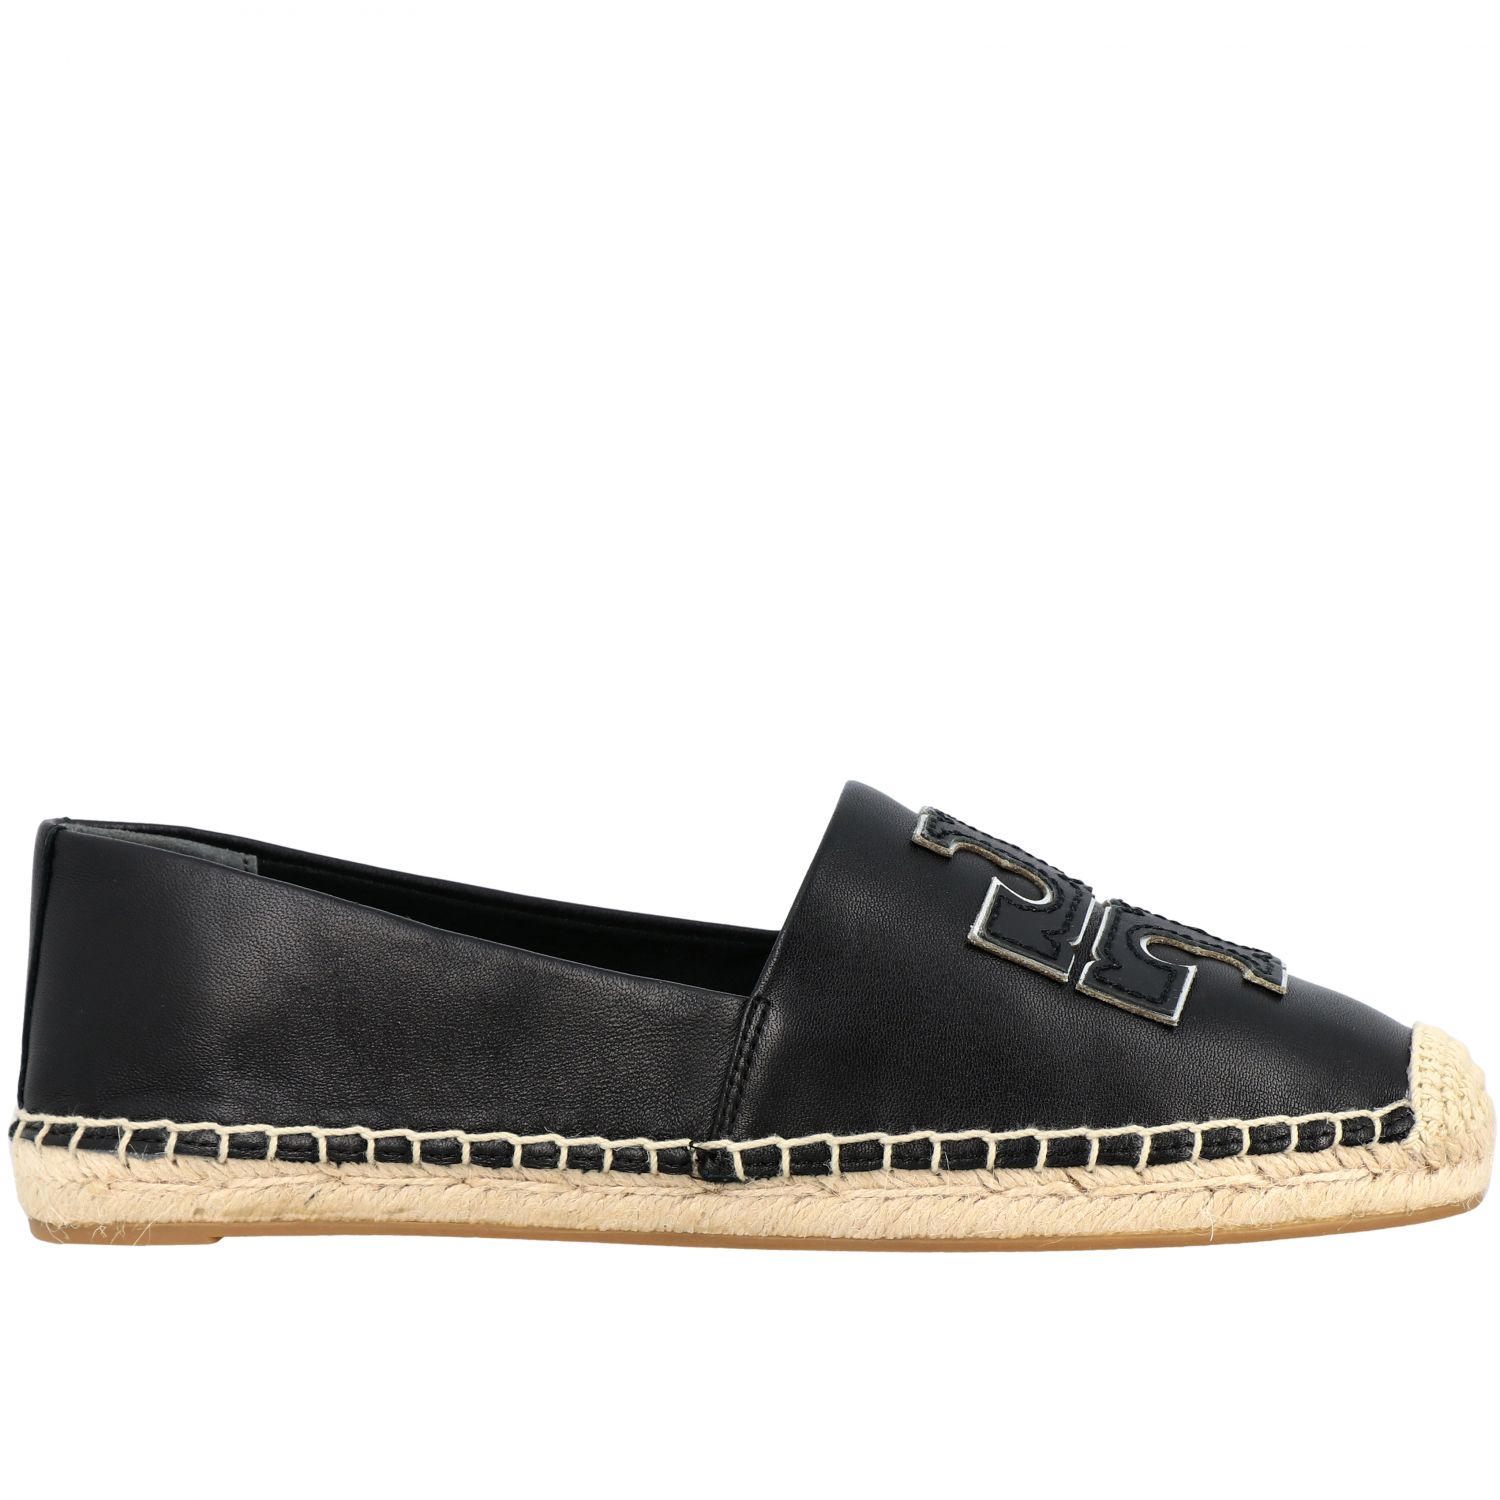 Tory Burch Outlet: Ines espadrilles in nappa leather with emblem - Black | Tory  Burch espadrilles 52035 online on 